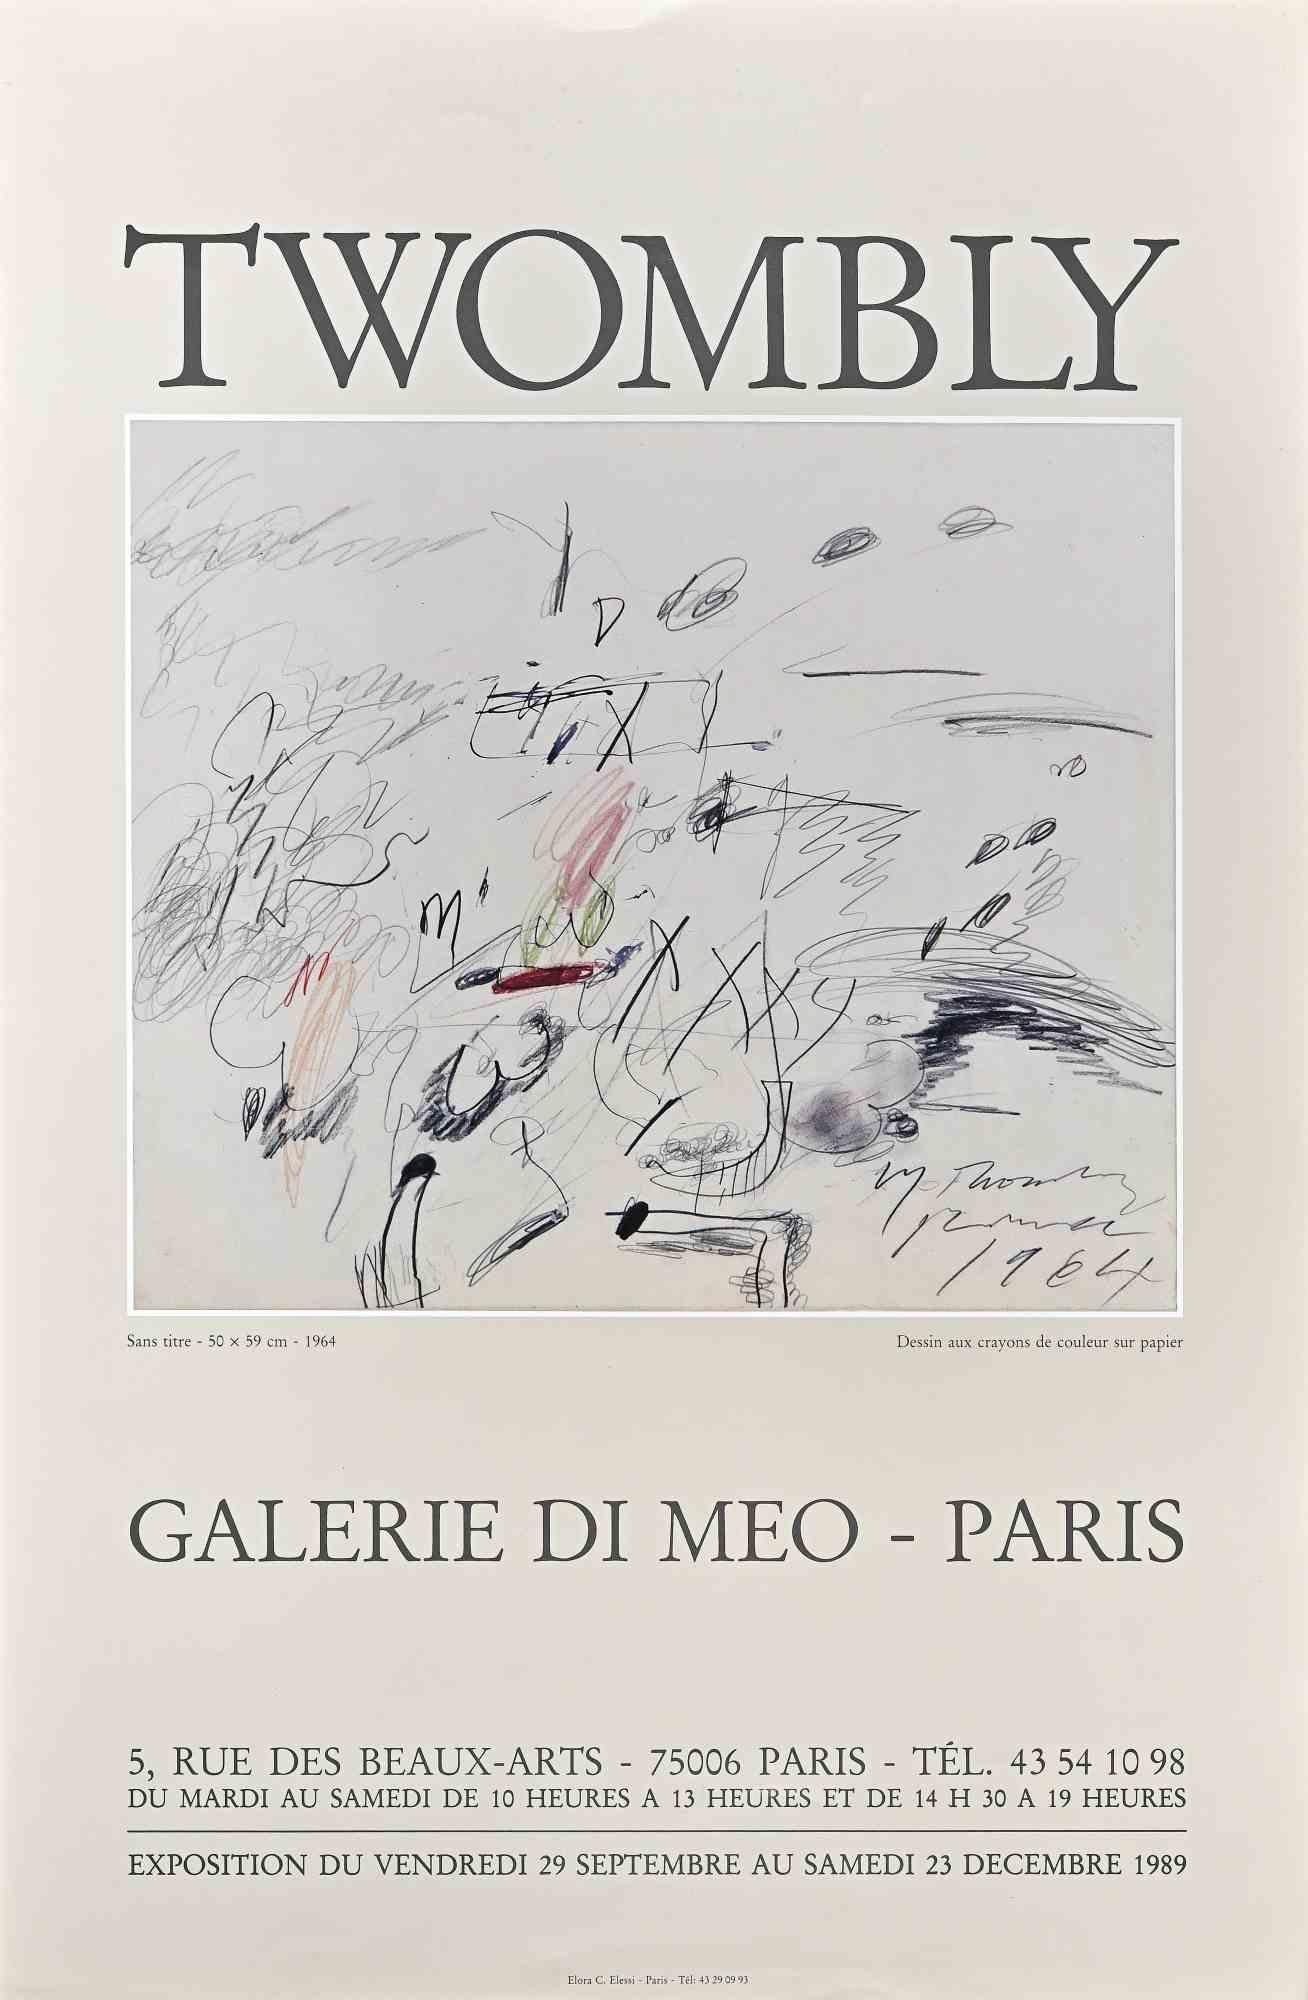 Cy Twombly Exhibition Galerie di Meo - Paris is an exhibition poster made by Cy Twombly in 1989.

Offset print.

Hand-signed.

Good condition.